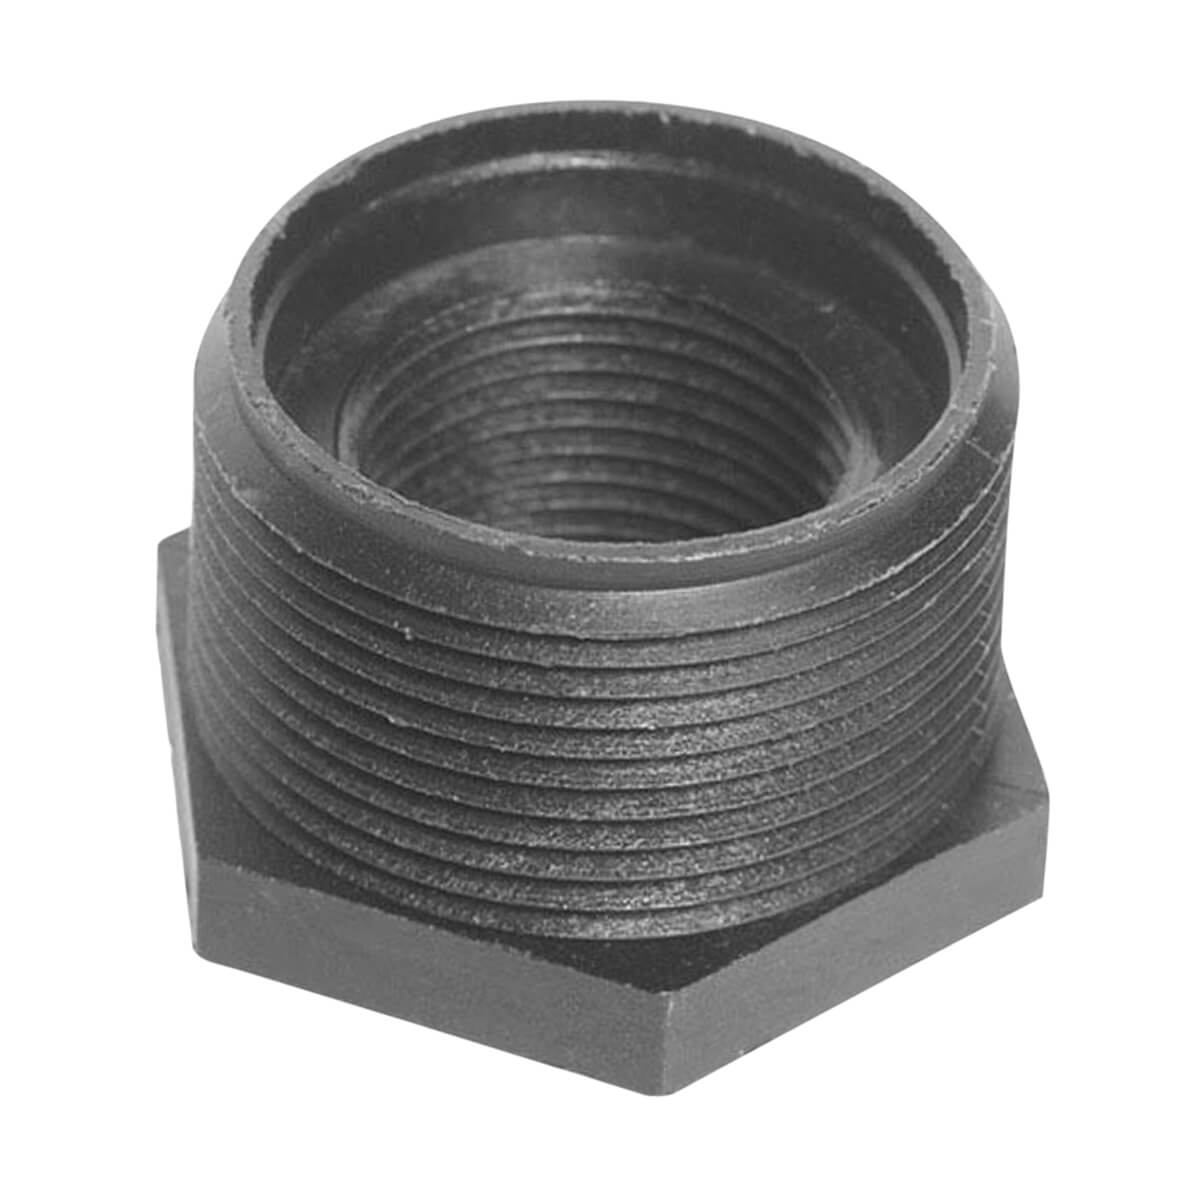 Reducer Bushings MPT x FPT - 1-1/4-in x 1-in